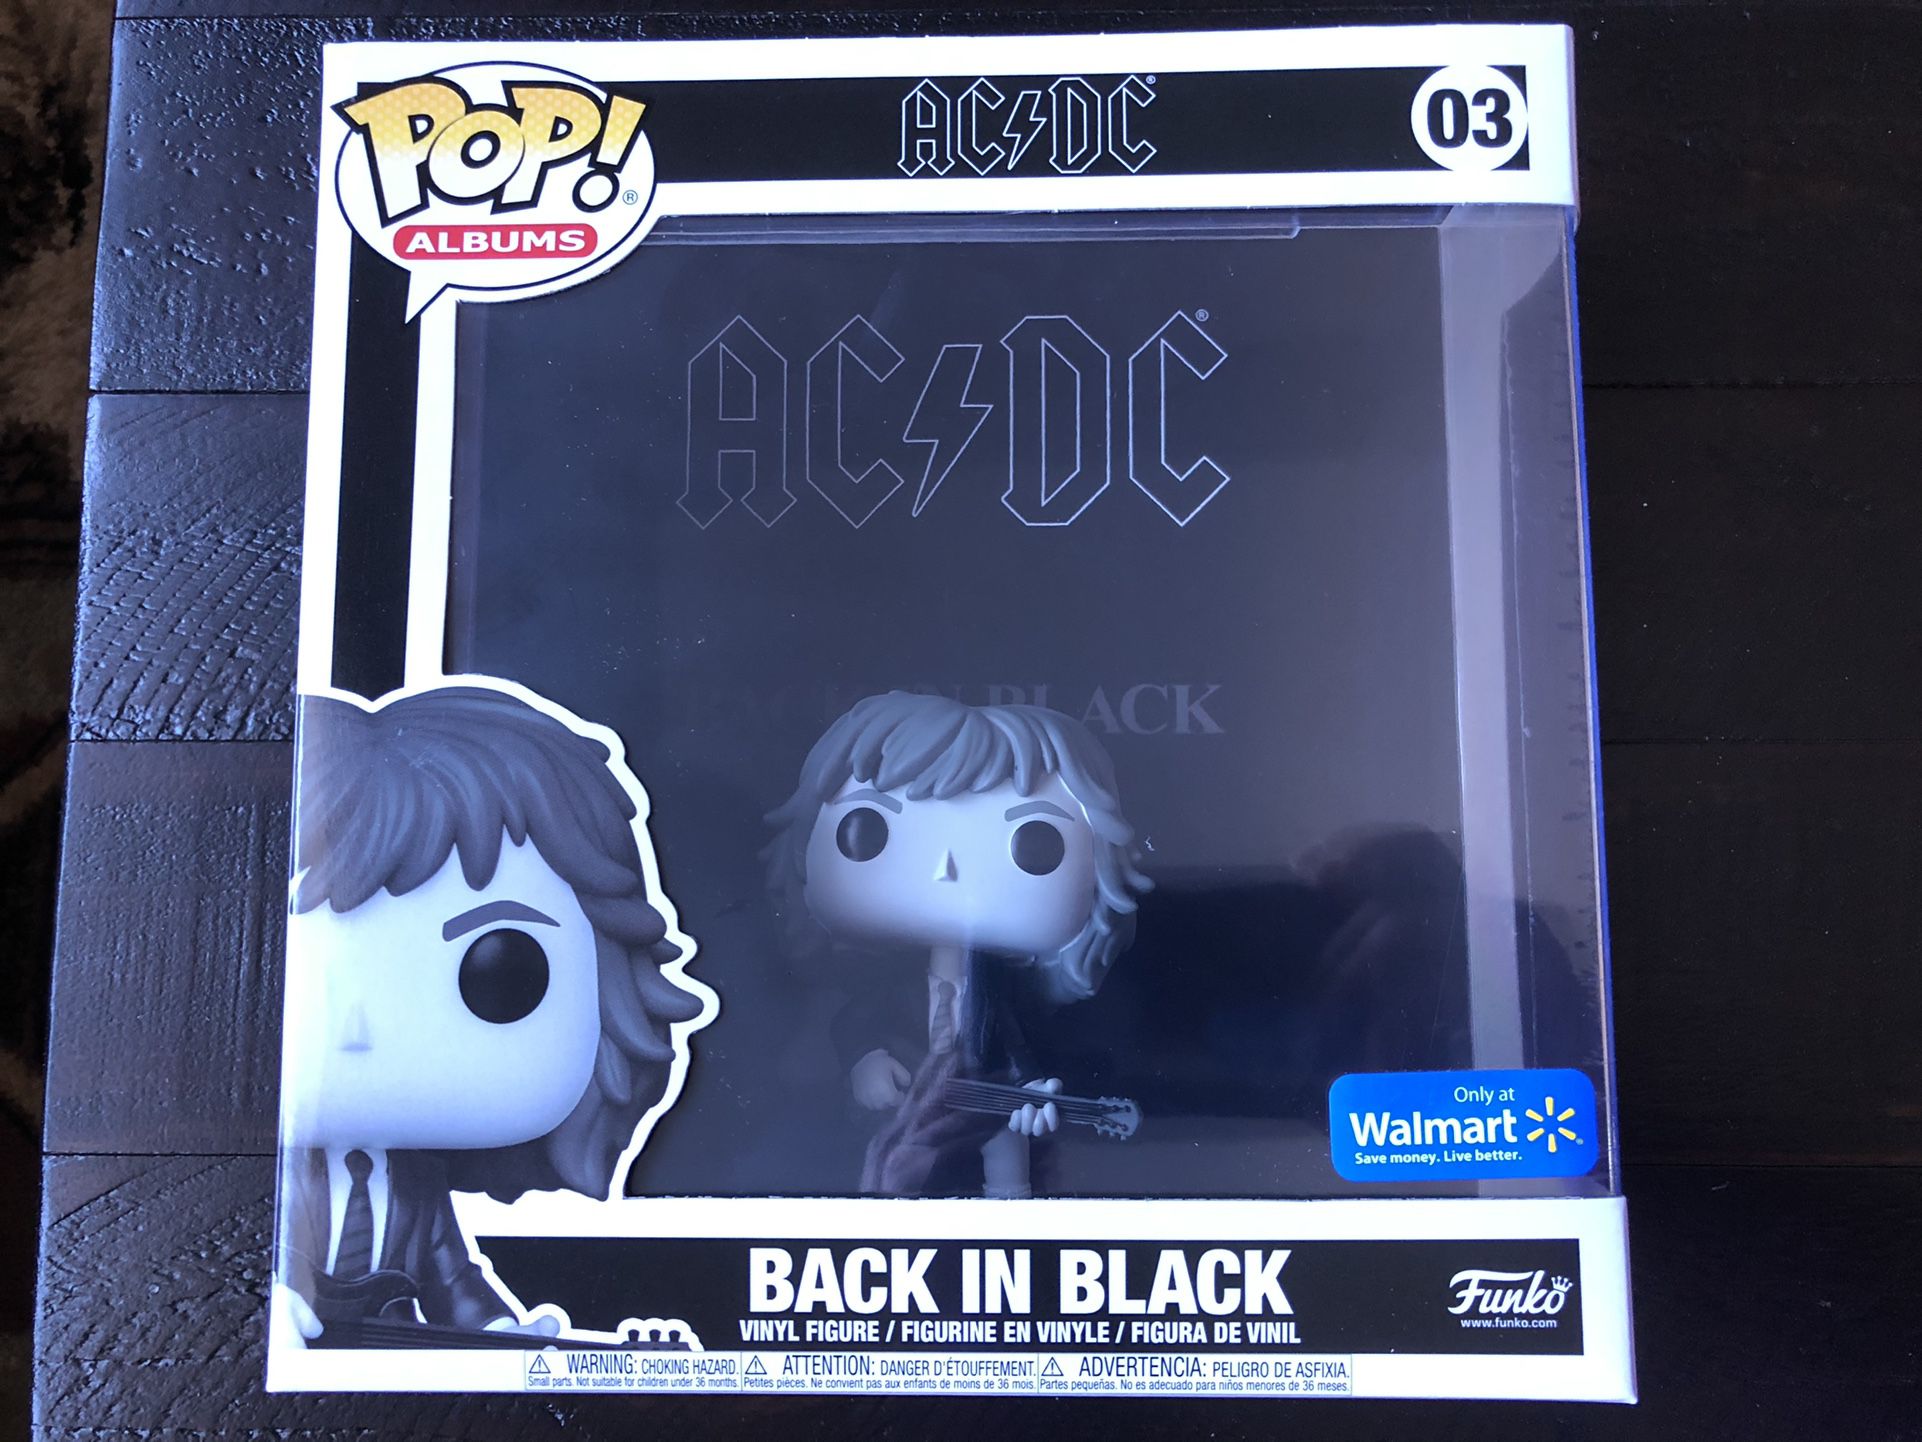 Funko POP! Albums #03 AC/DC Back in Black with Angus Young, Walmart Exclusive!!!